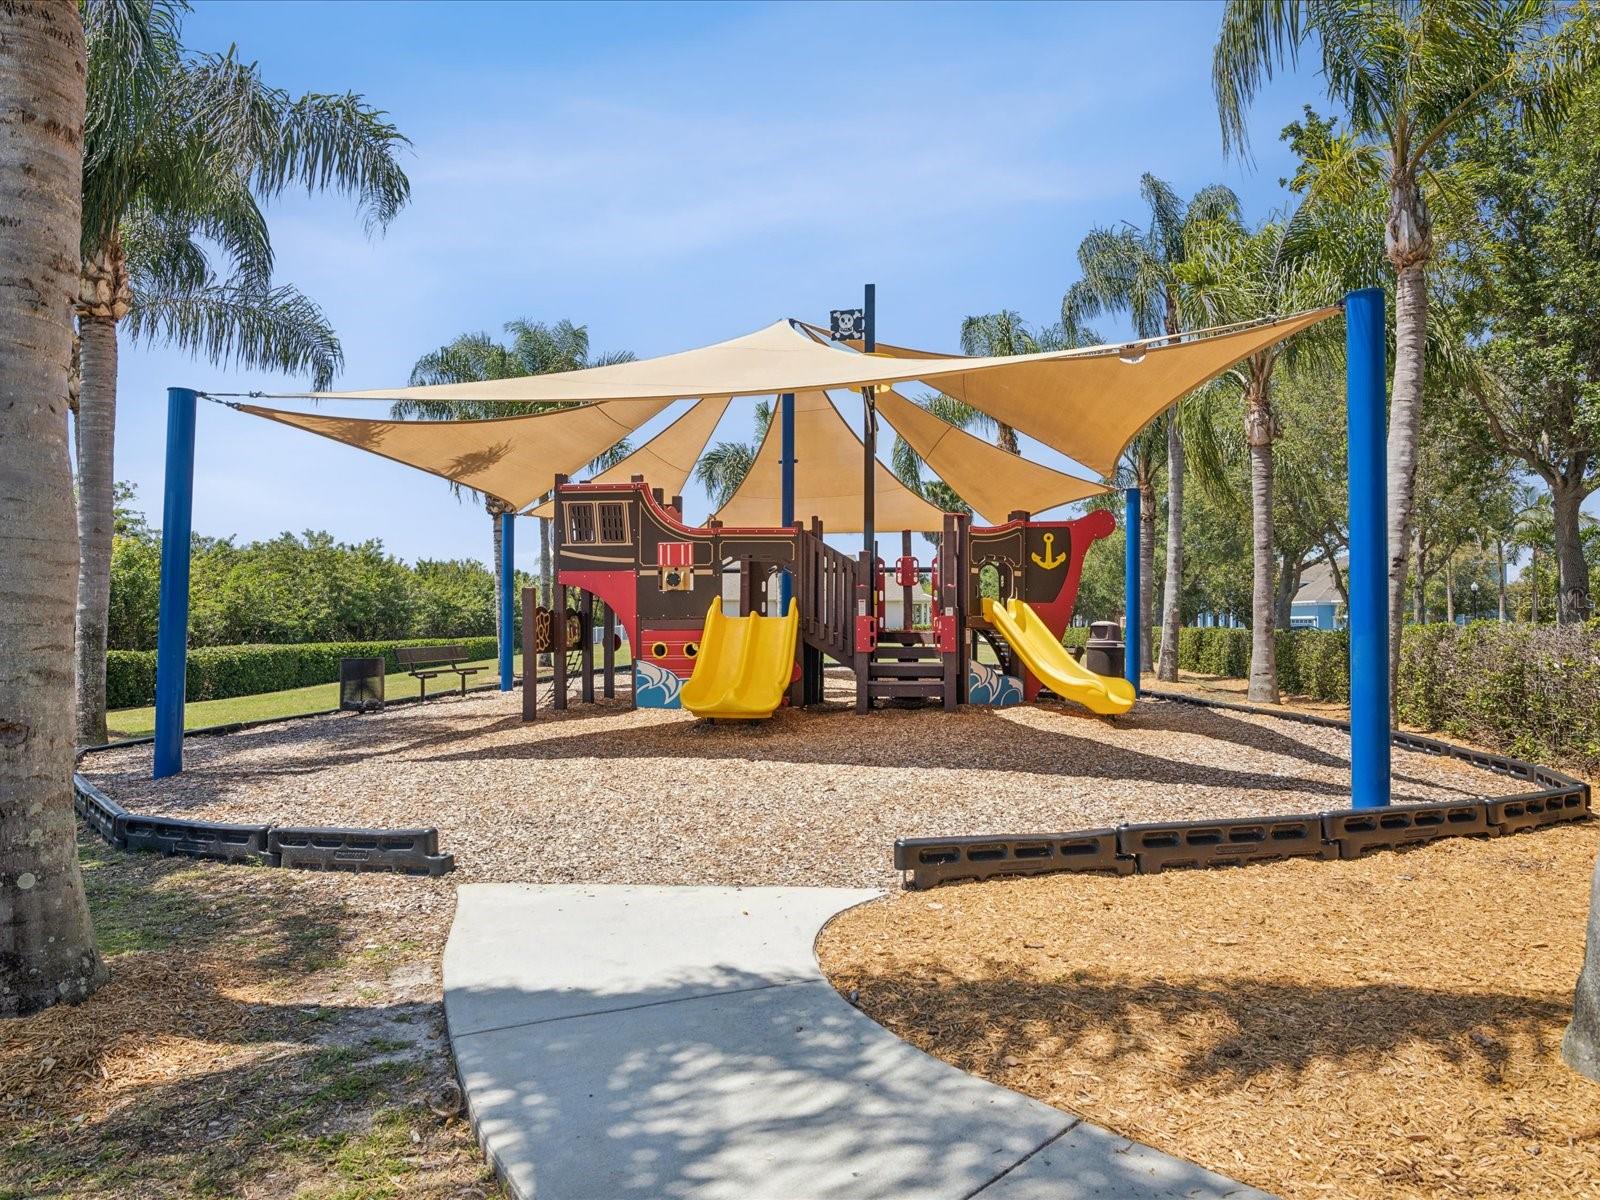 There is not a shortage of places for your kids to play in Mirabay! This playgound is next to the tiki huts on the canal side.